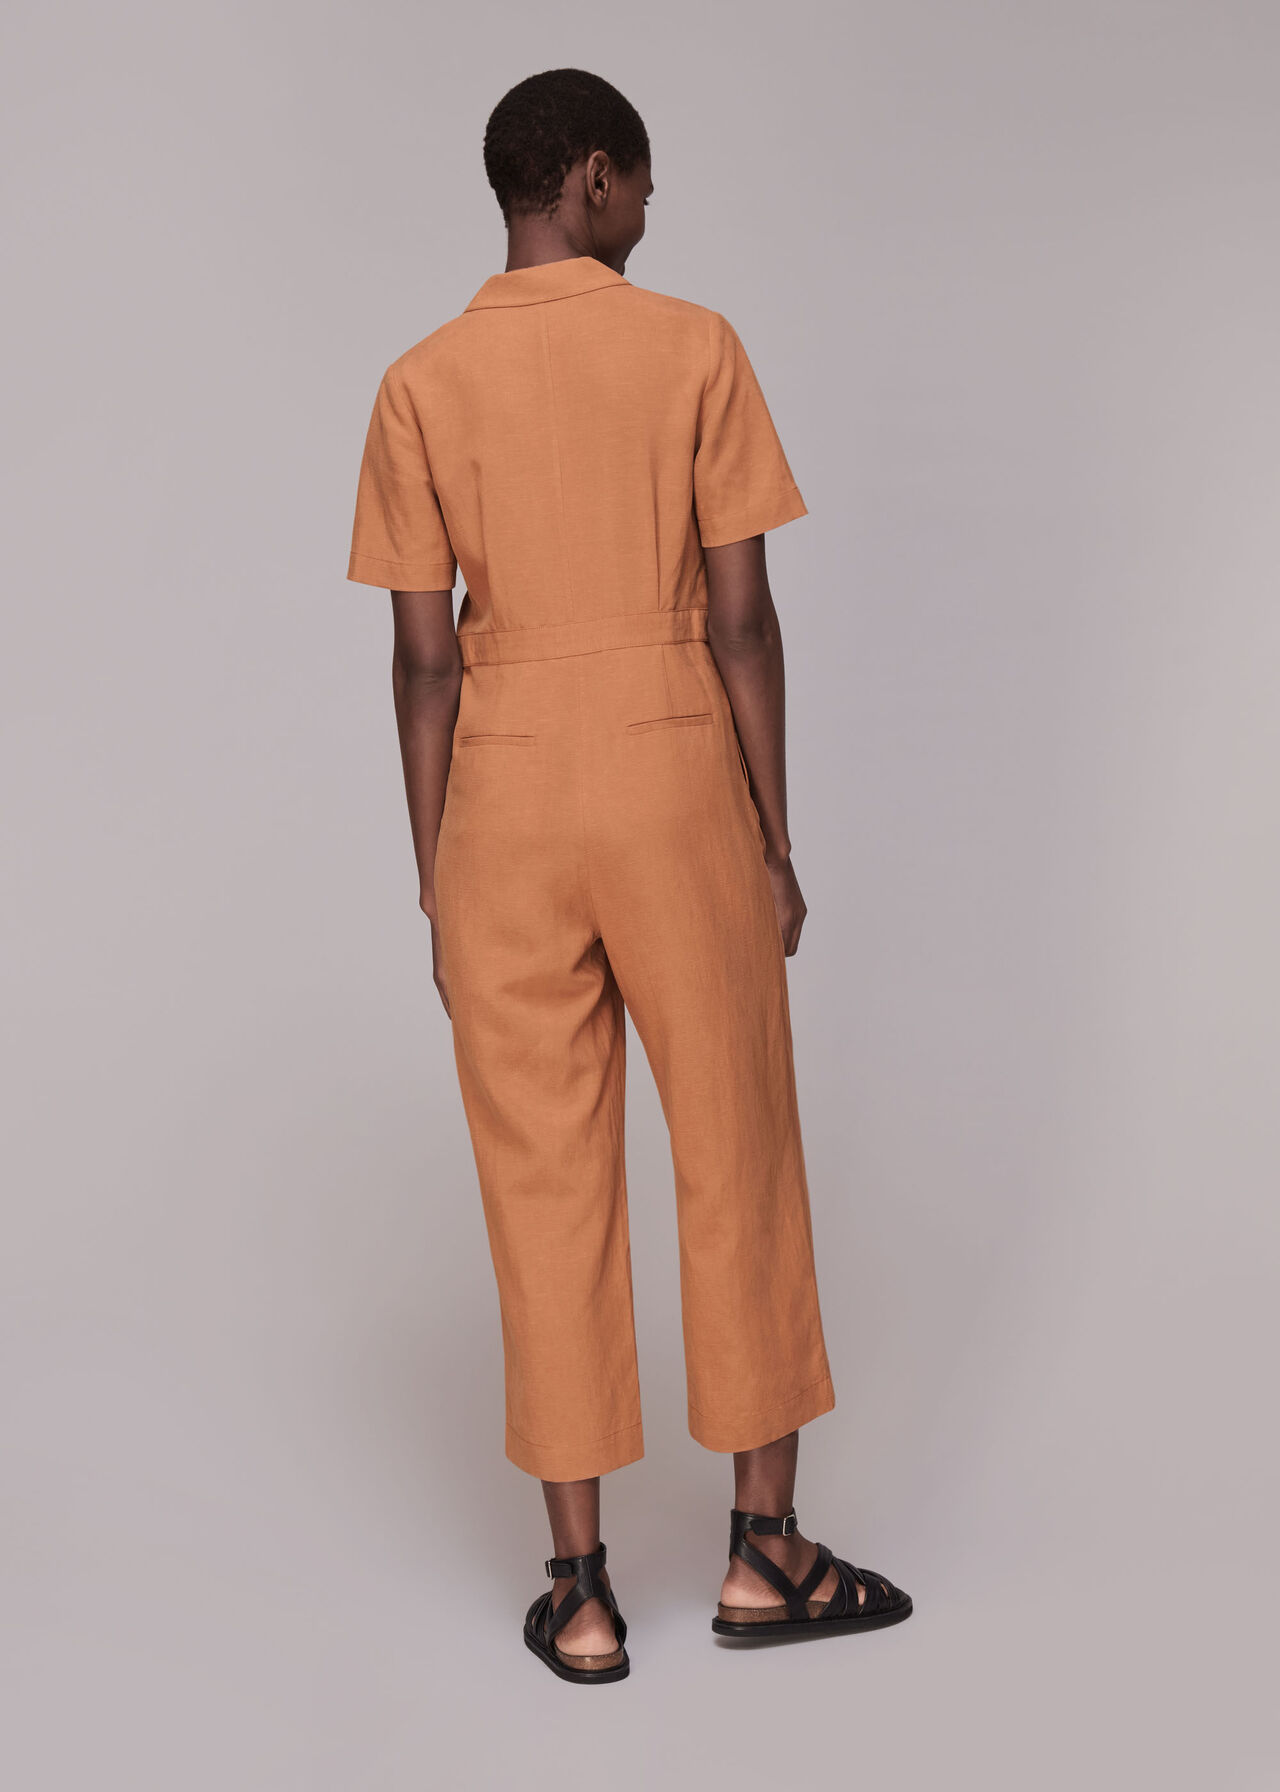 Amee Relaxed Jumpsuit